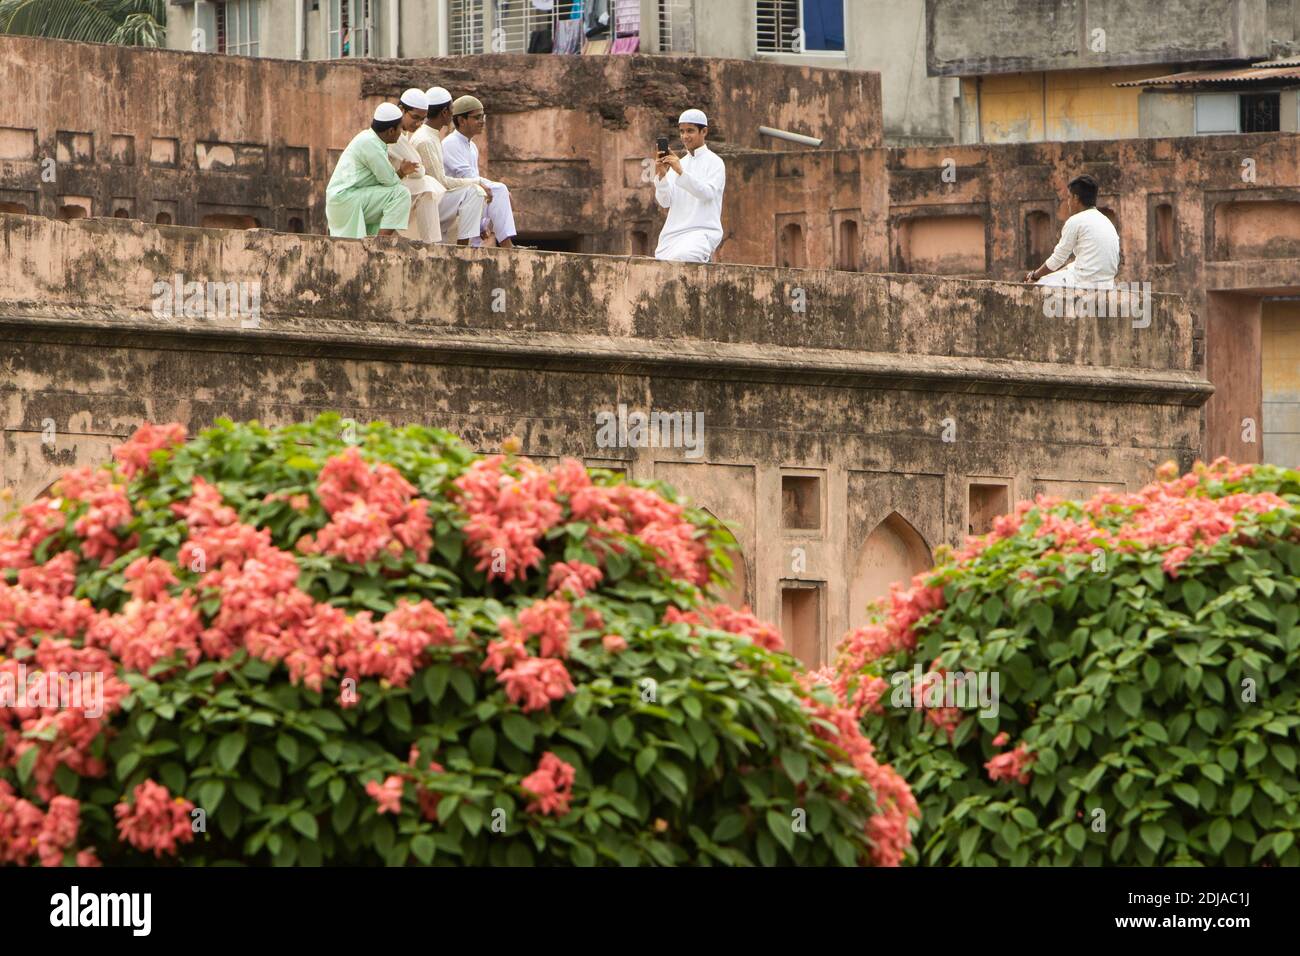 Dhaka, Bangladesh - October 30, 2018: a group of students take a photo on the top of the Lalbagh Fort's walls. Stock Photo